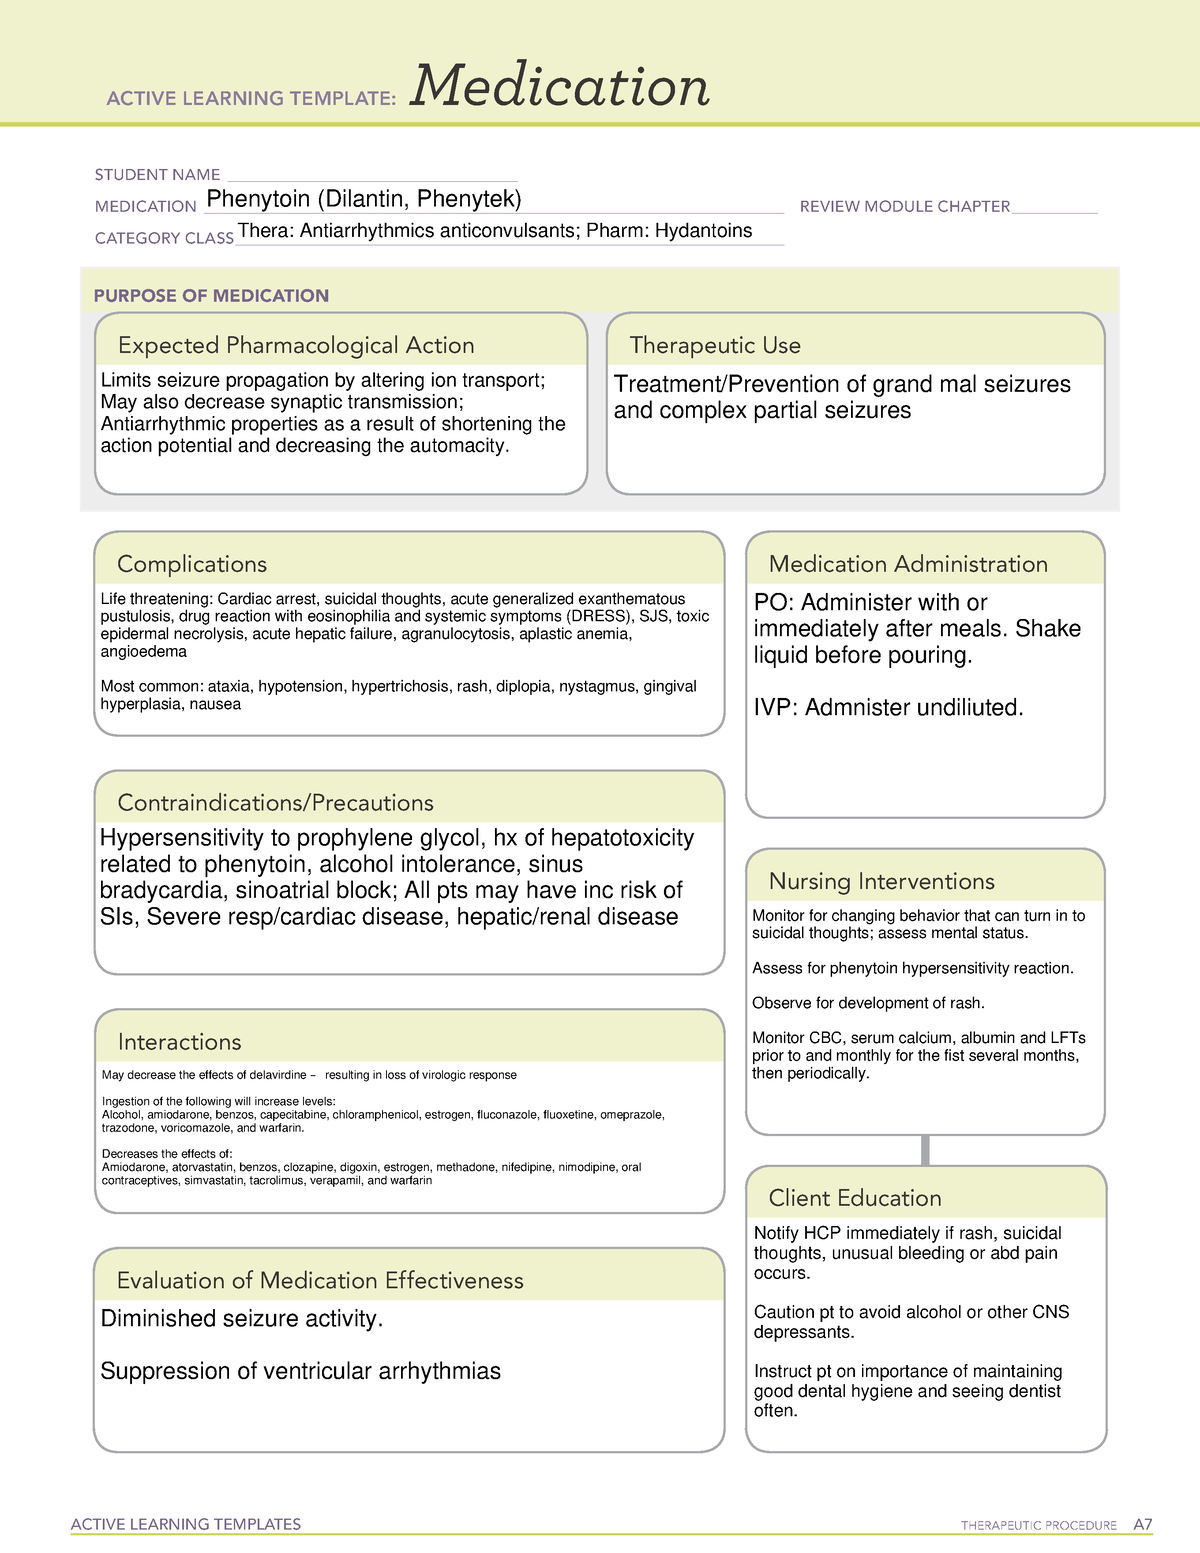 phenytoin-ati-med-template-active-learning-templates-therapeutic-procedure-a-medication